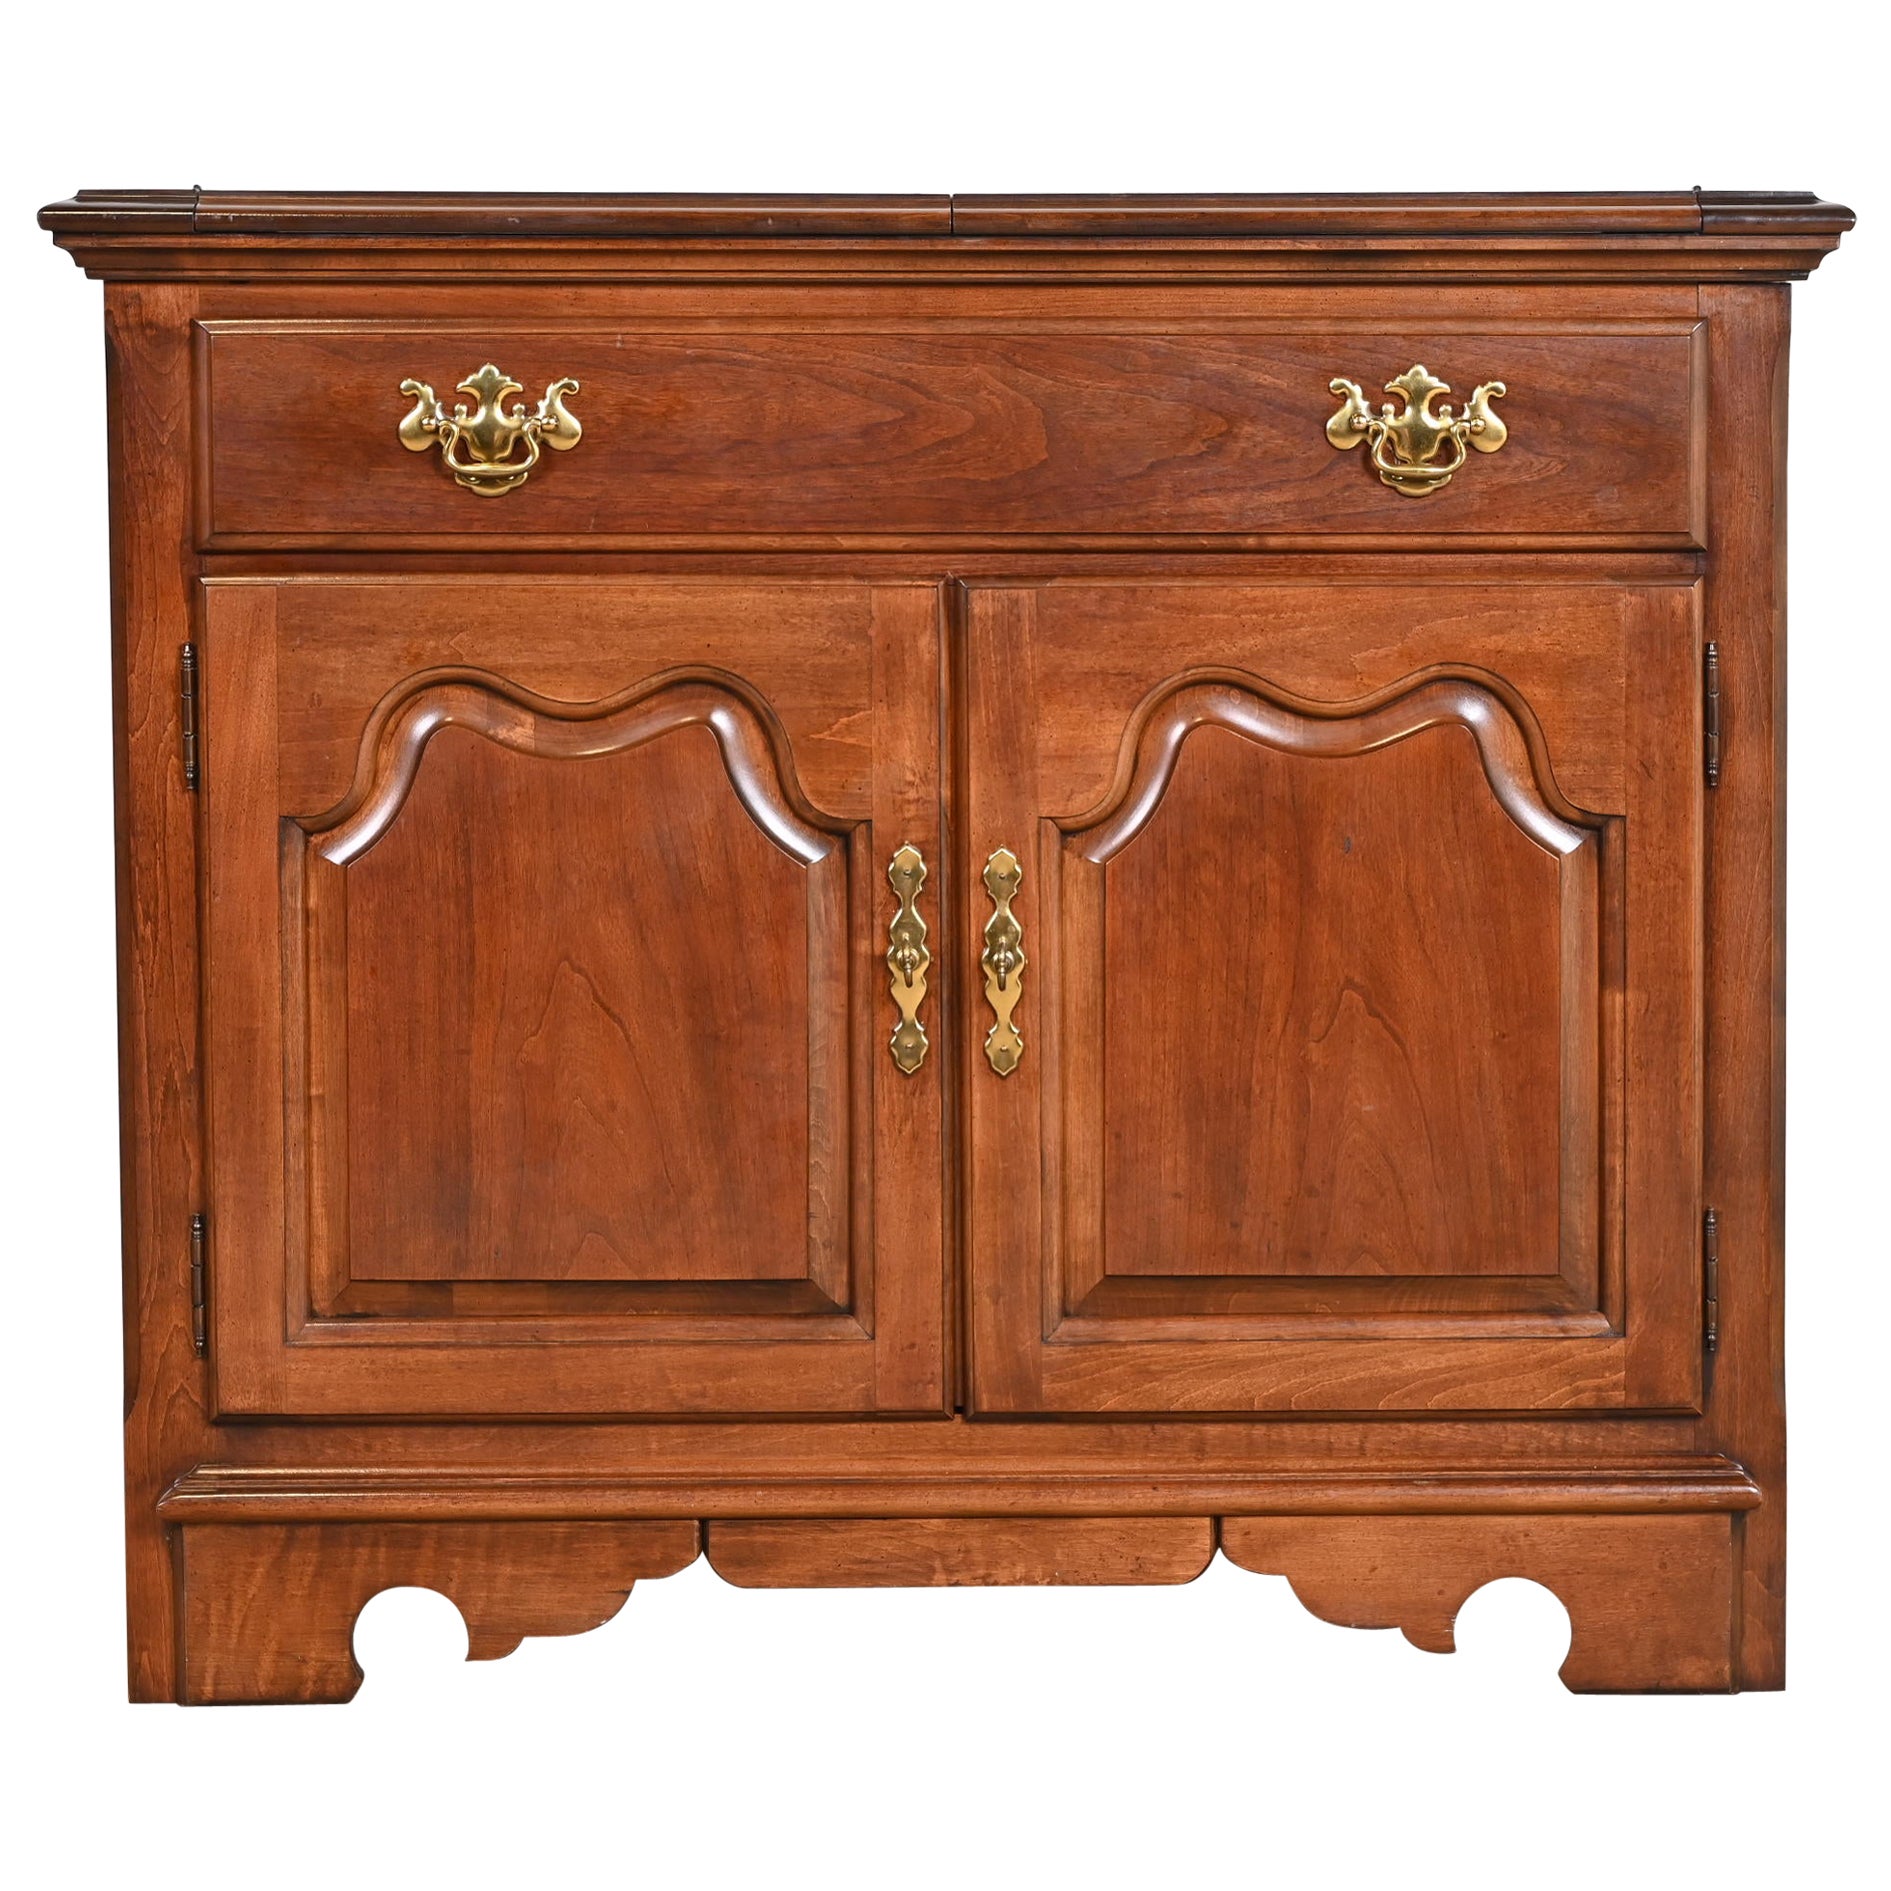 Thomasville Georgian Solid Cherry Wood Flip Top Server or Bar Cabinet For Sale